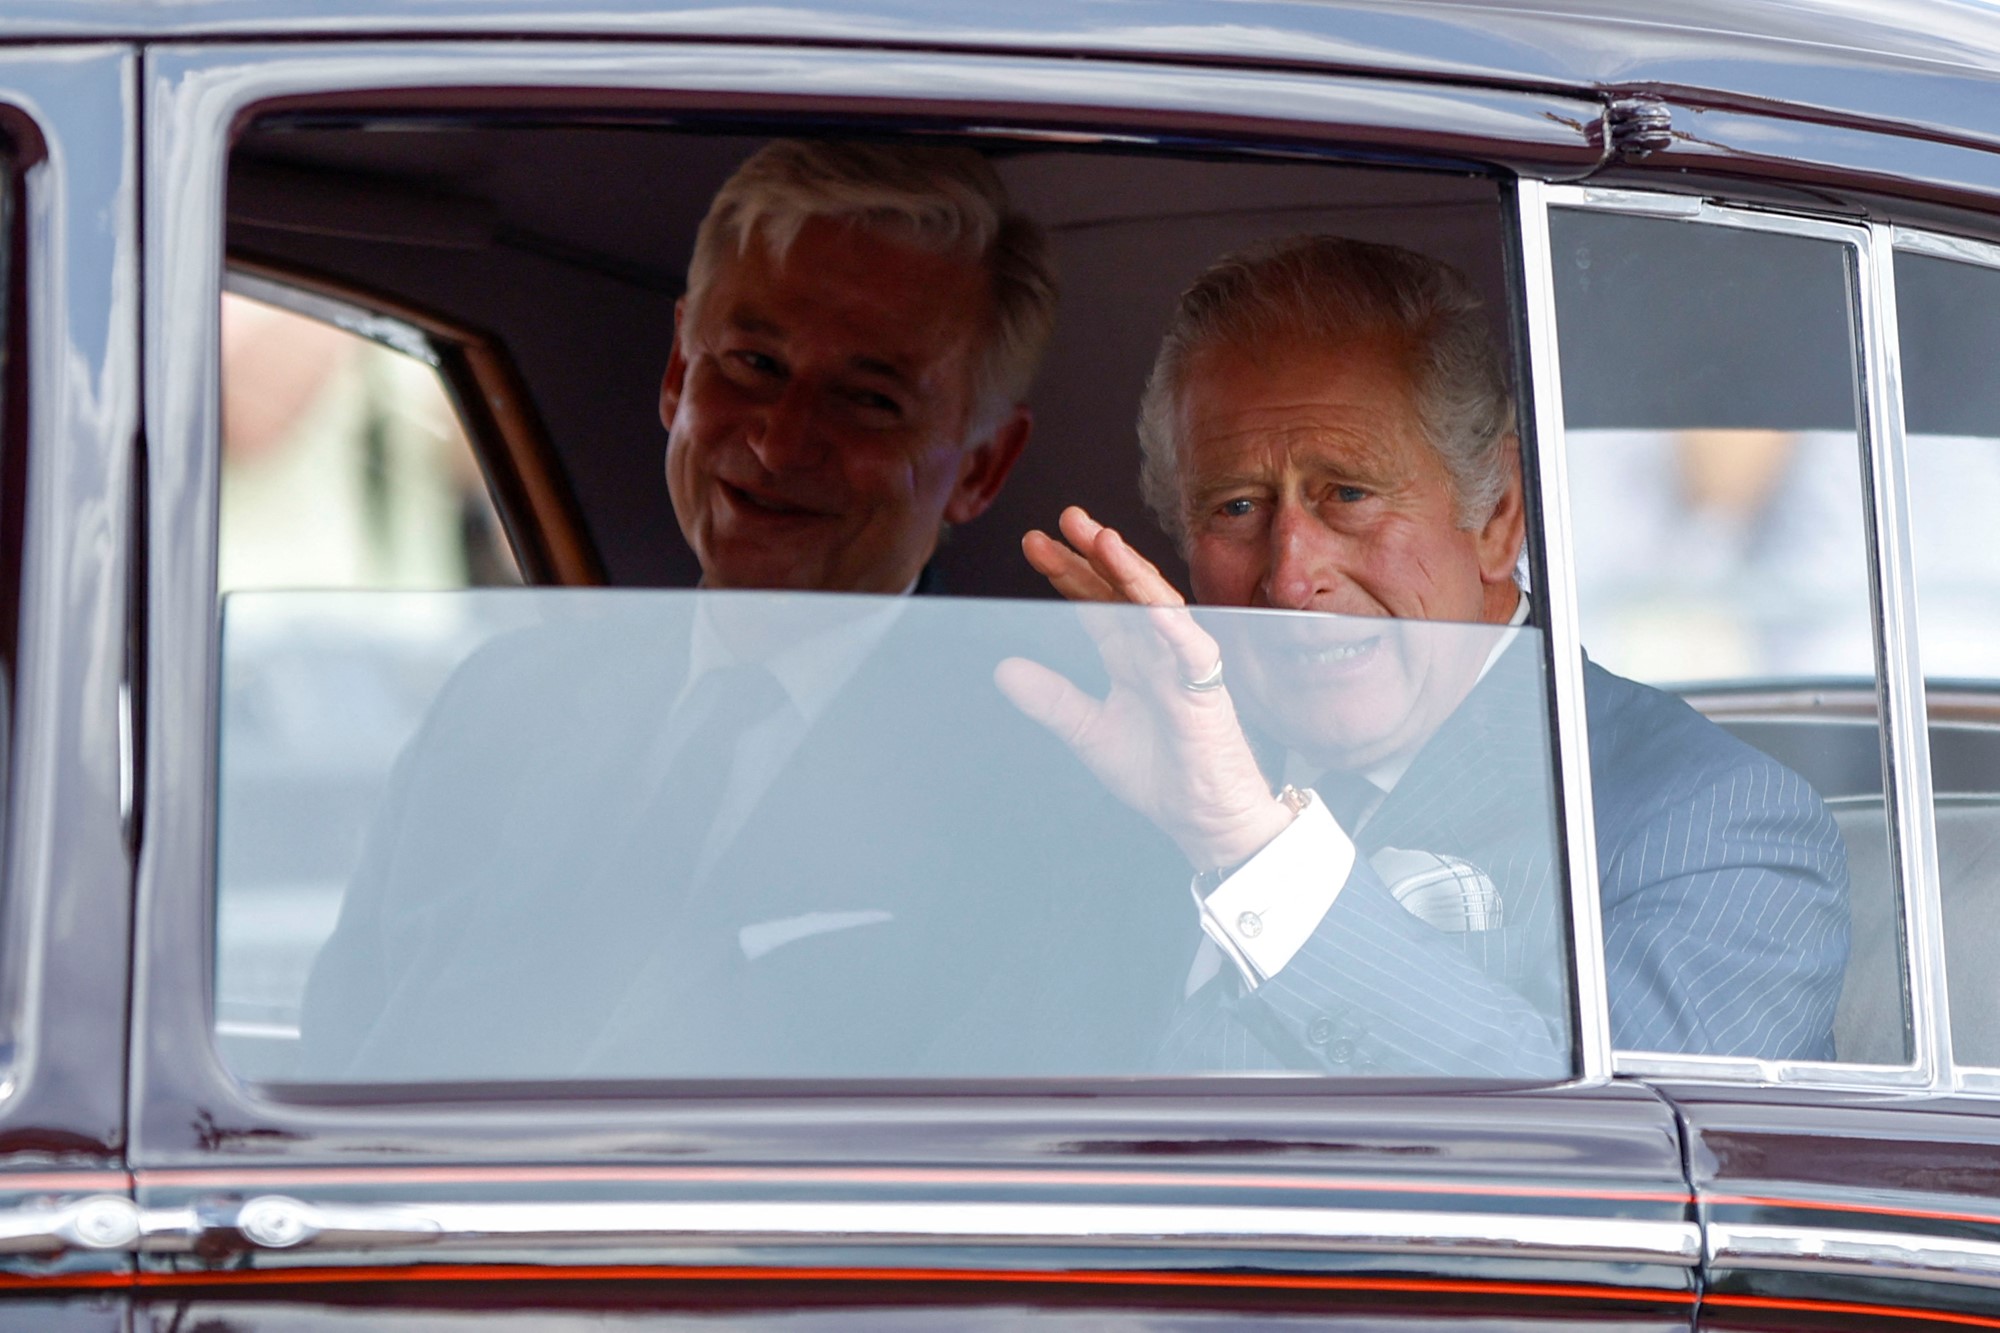 King Charles is pictured through a car window waving.